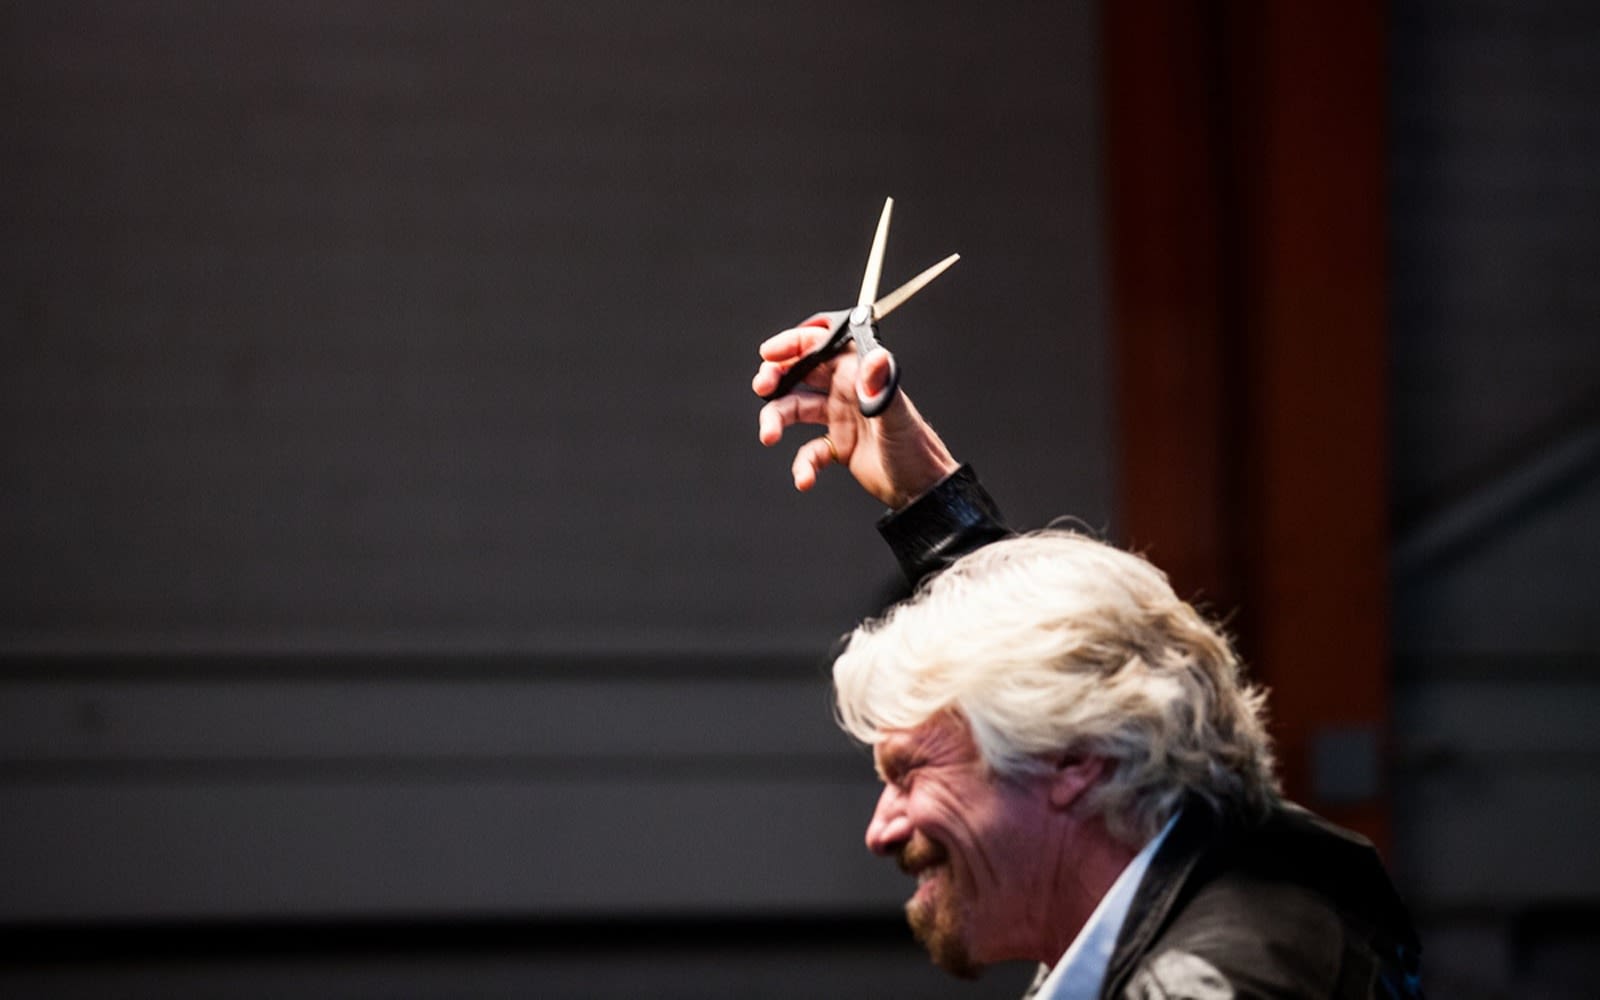 Richard Branson smiling and holding scissors in the air